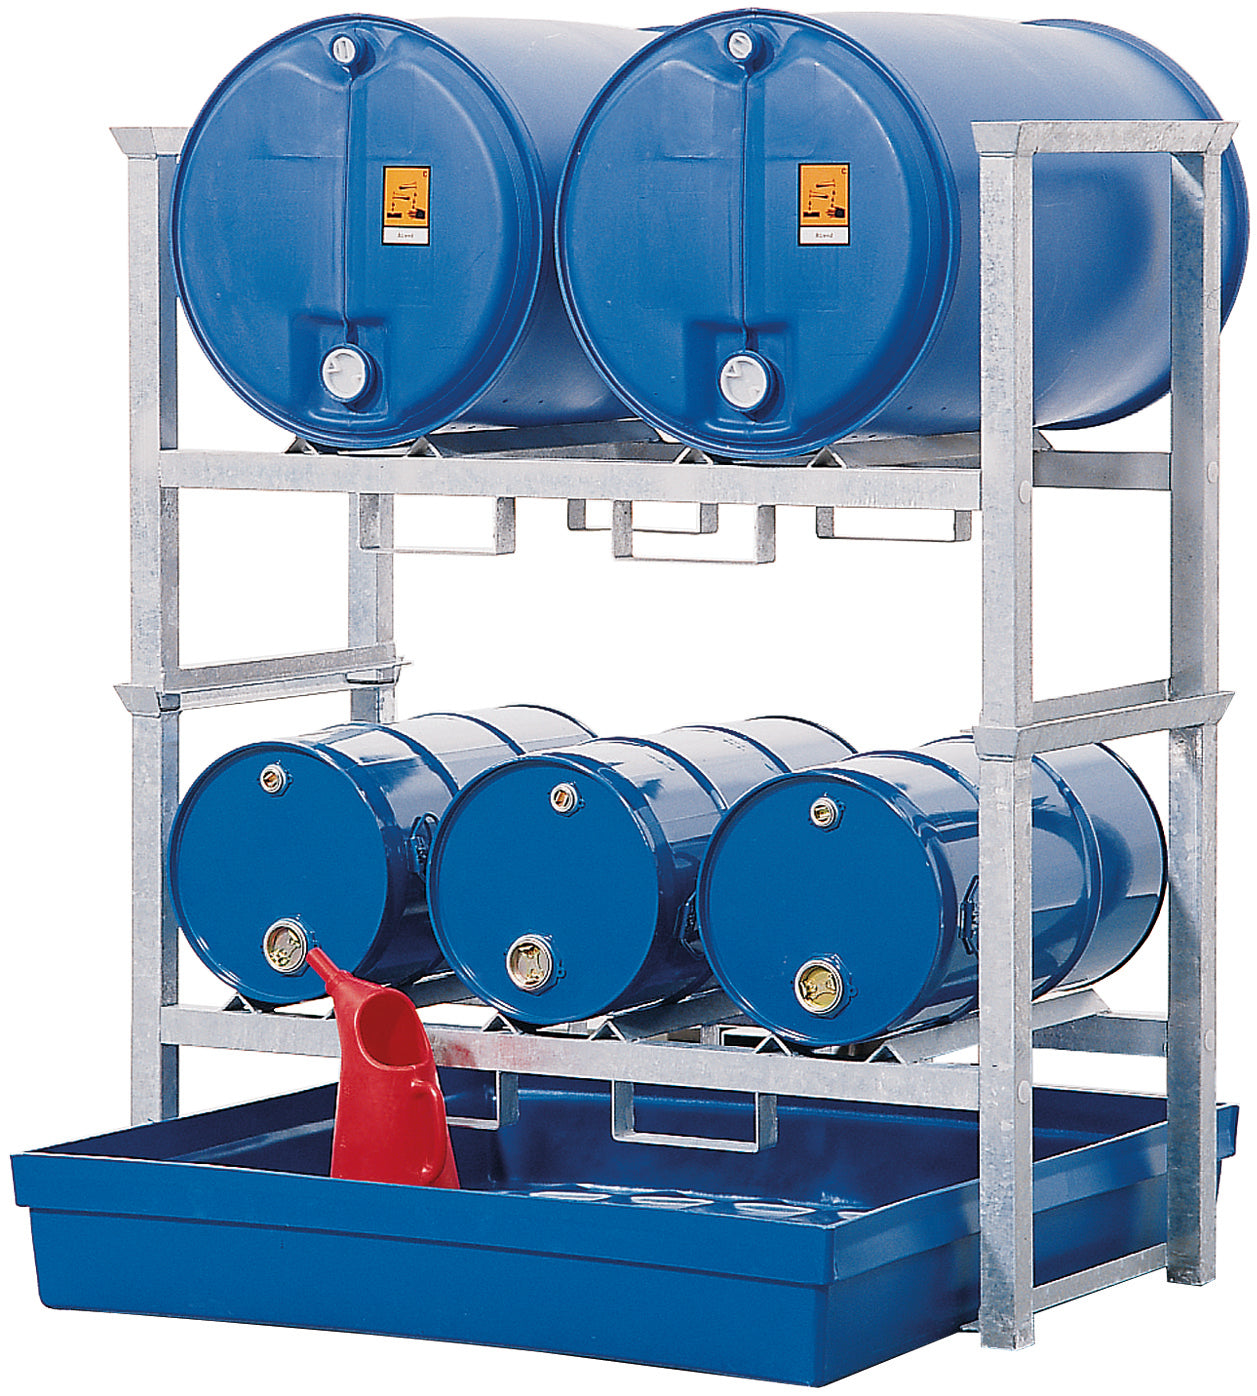 Fill and storage station sump made of PE 1335x1200x1580, steel galvanized